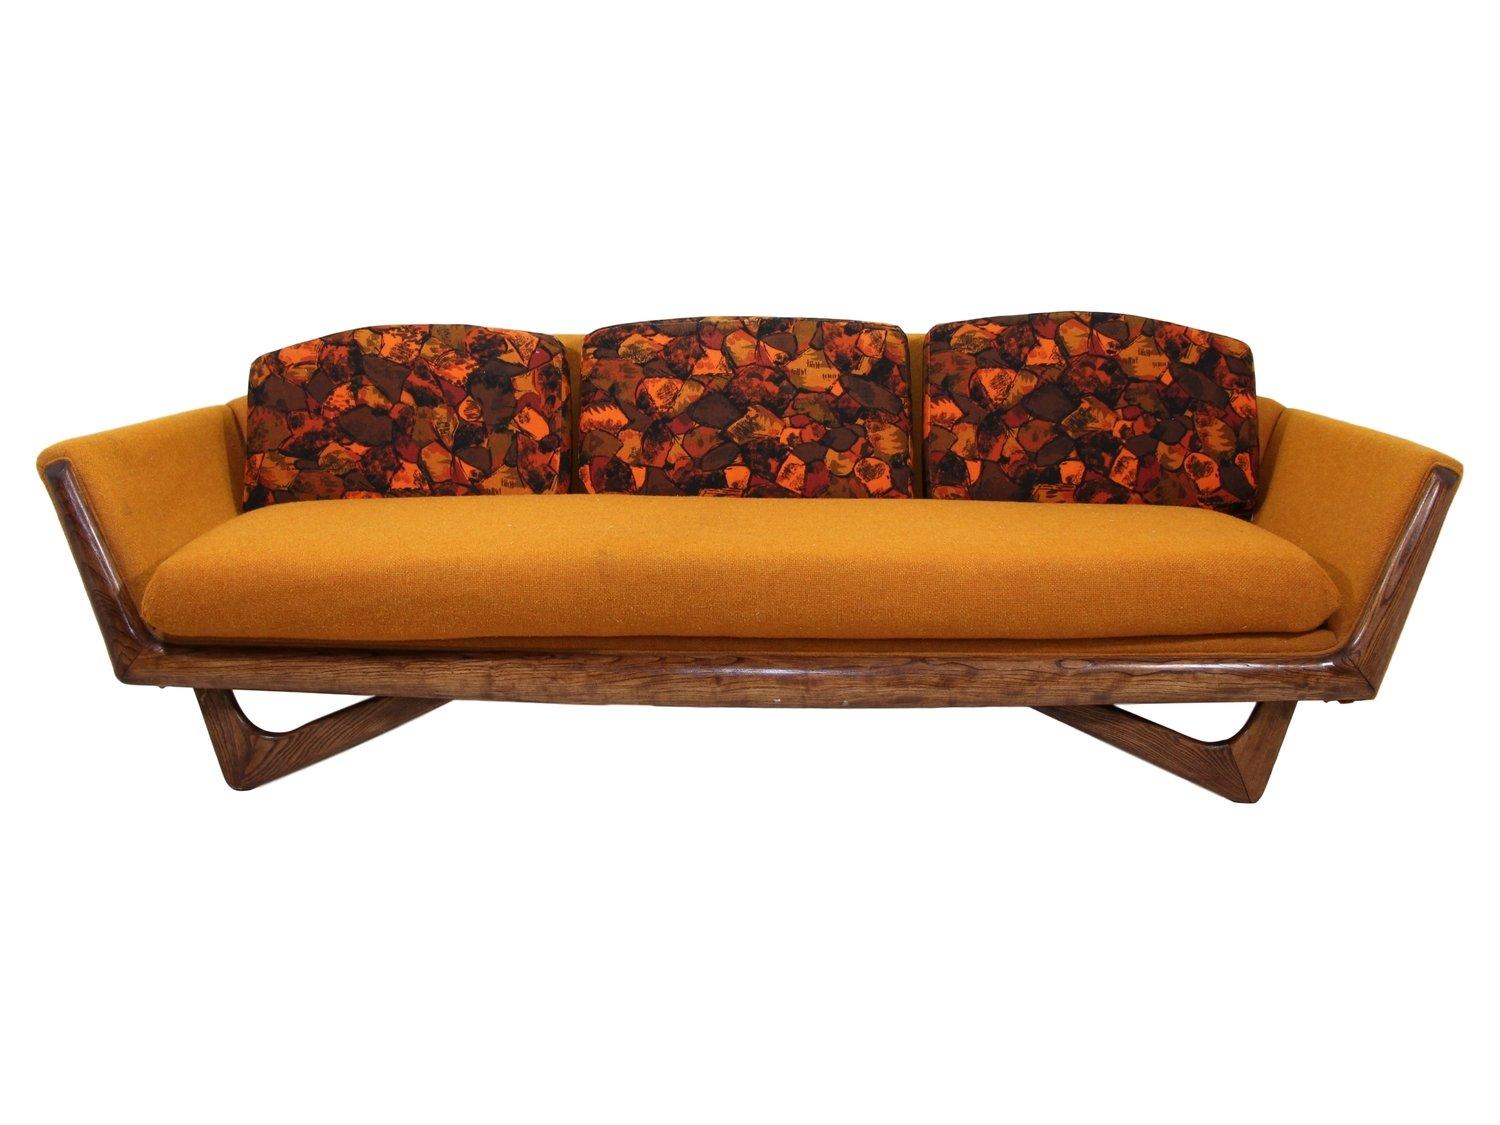 Mid-Century Modern sofa in the style of Adrian Pearsall made by Prestige Furniture Company.

Very good vintage condition. It has the original upholstery. There are some faint stains in the upholstery but no tears or damage. Walnut